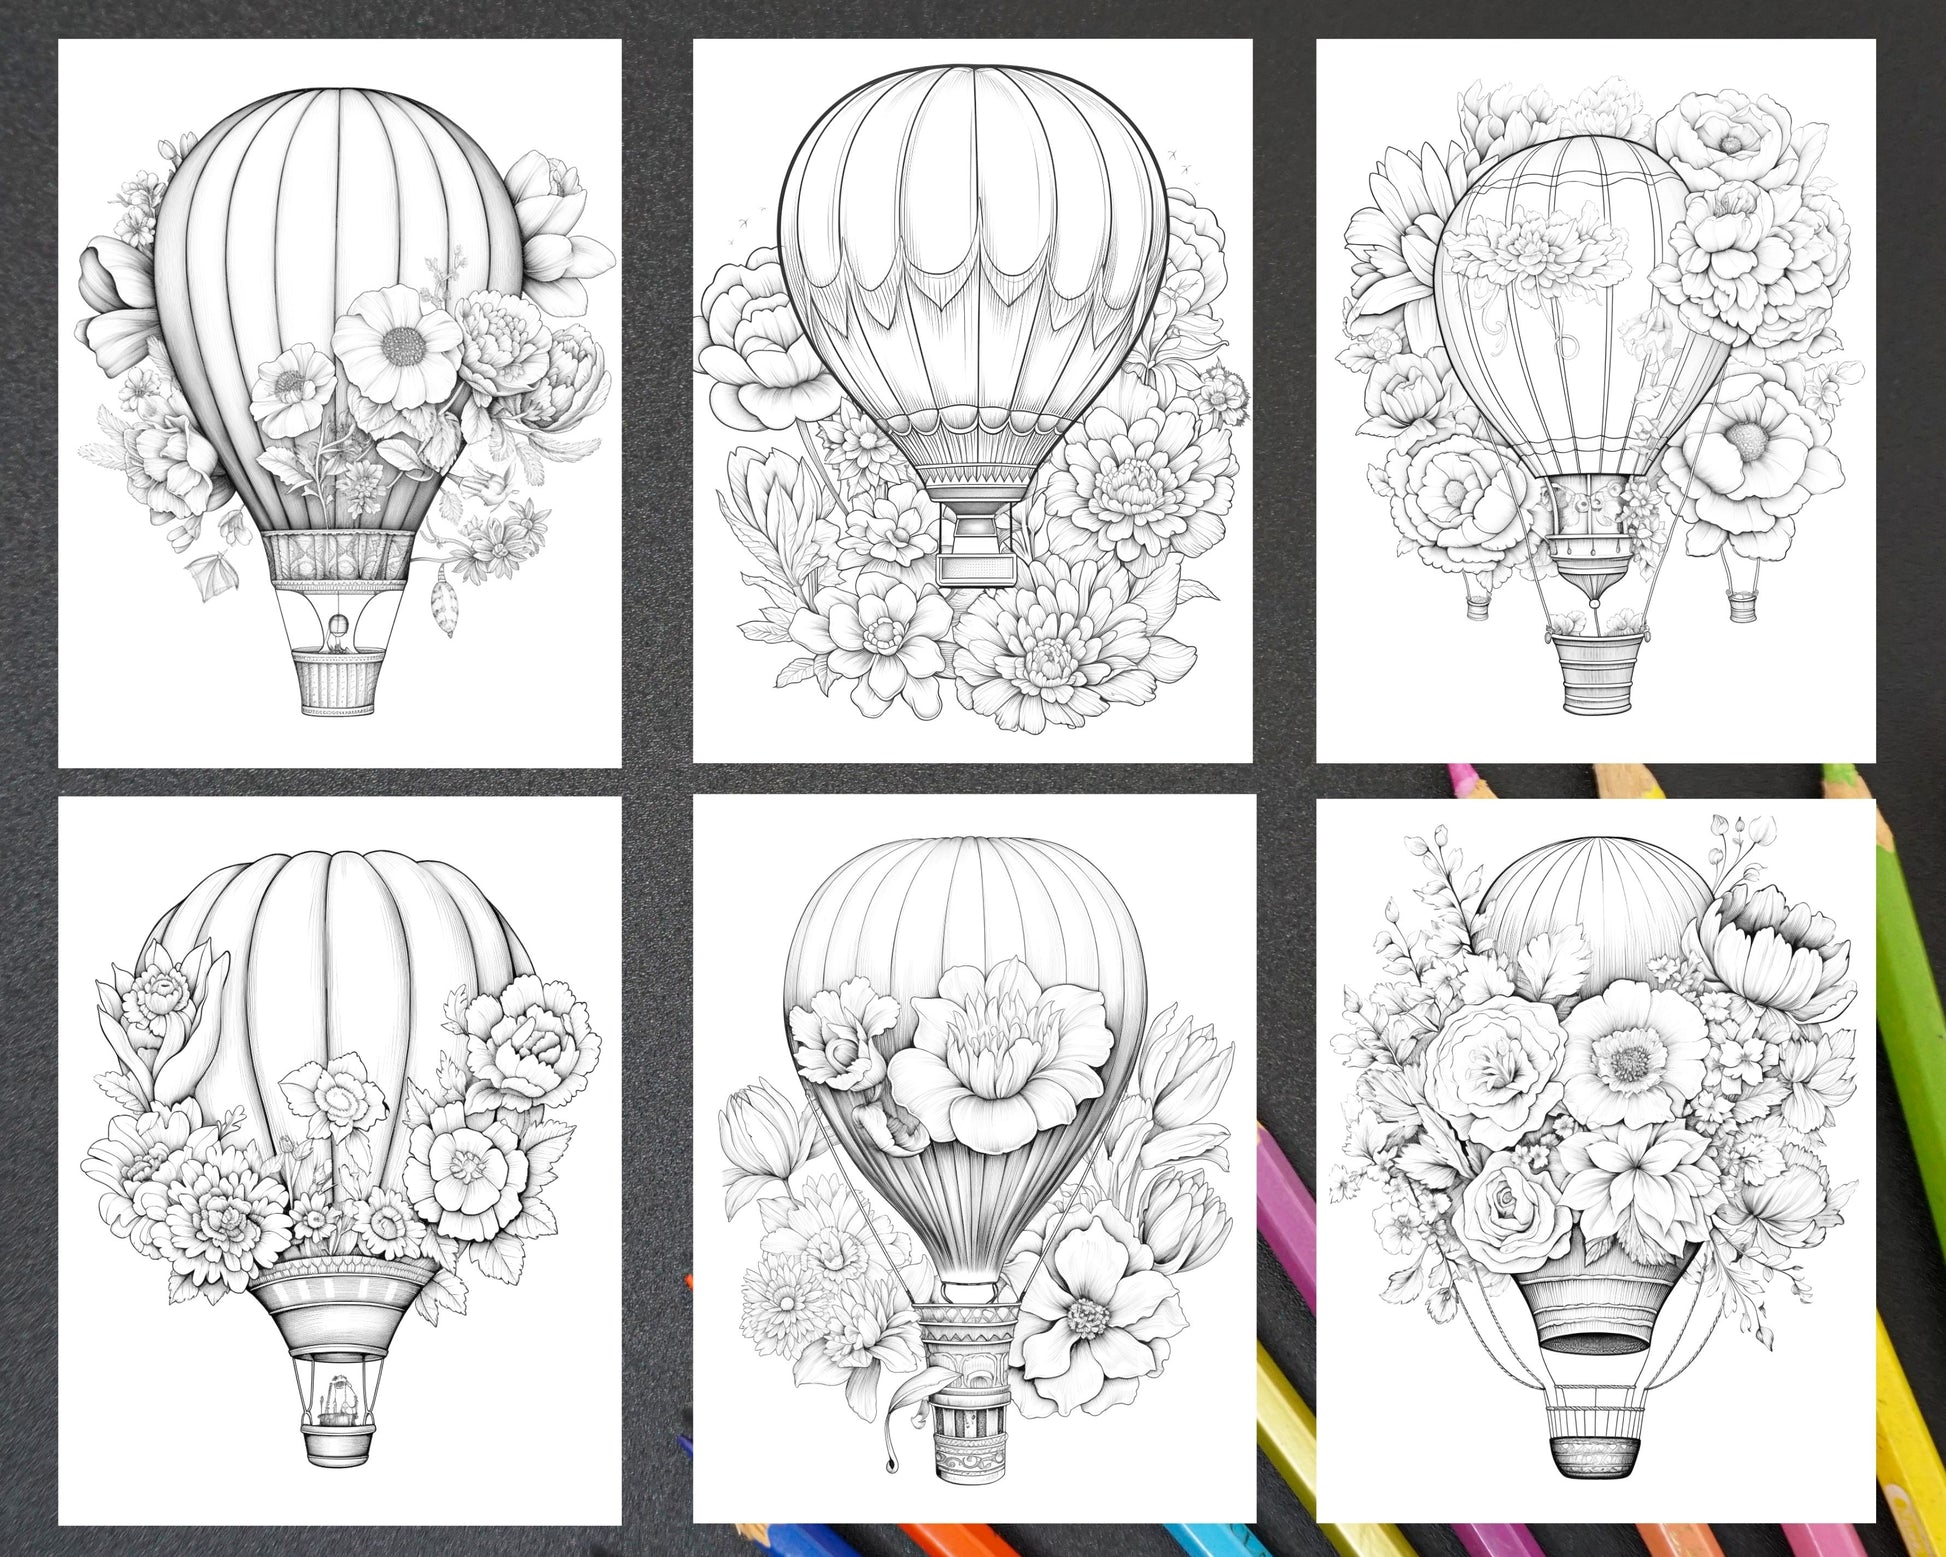 Flower Hot Air Balloons Grayscale Coloring Pages, Printable Coloring Sheets for Adults, DIY Coloring Art Activity, Relaxing Stress Relief Craft, Intricate Black and White Illustrations, High-Quality PDF Coloring Download